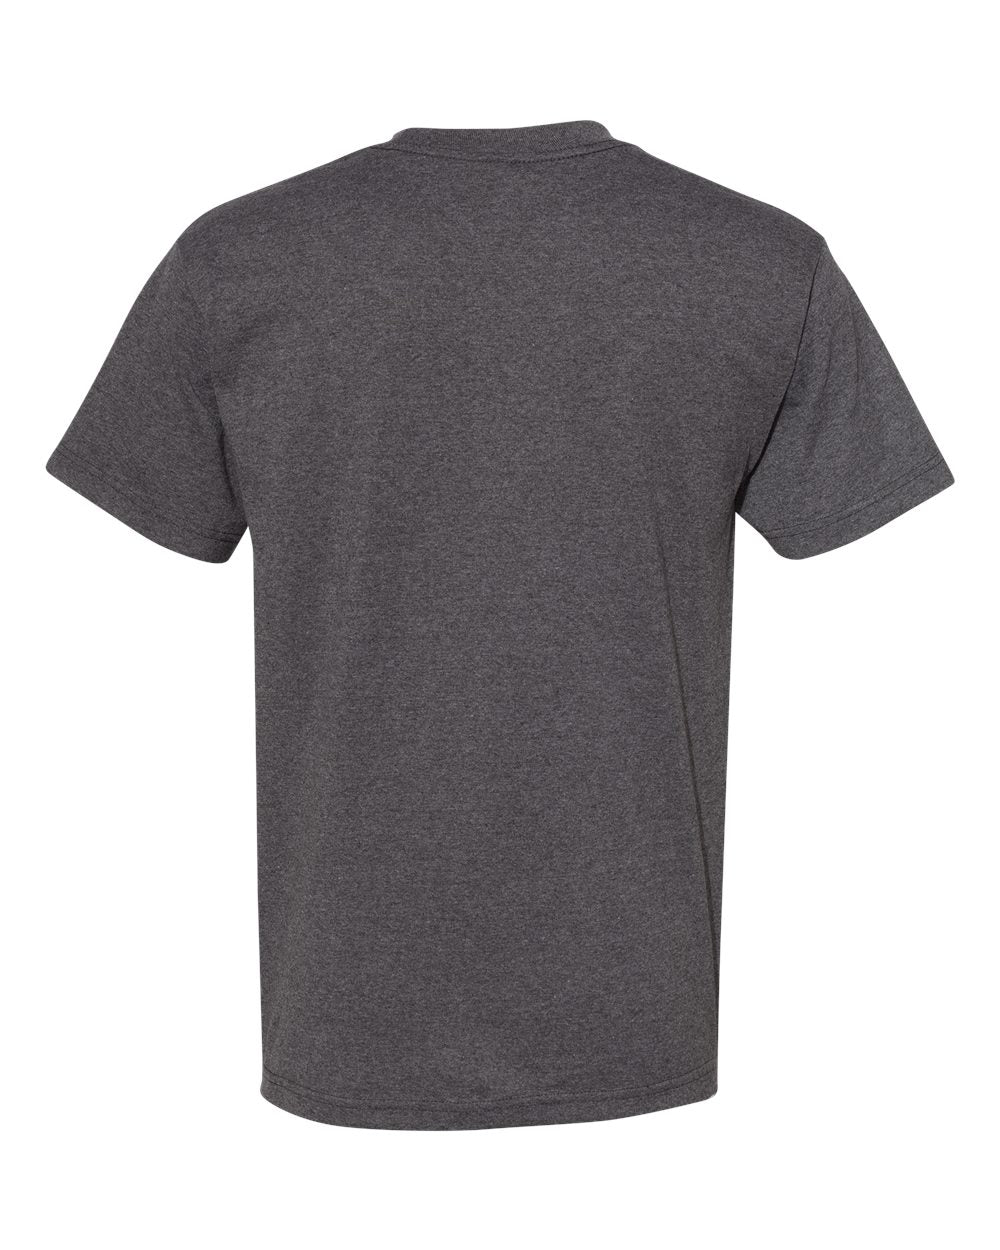 American Apparel Unisex Heavyweight Cotton Tee 1301 #color_Heather Charcoal